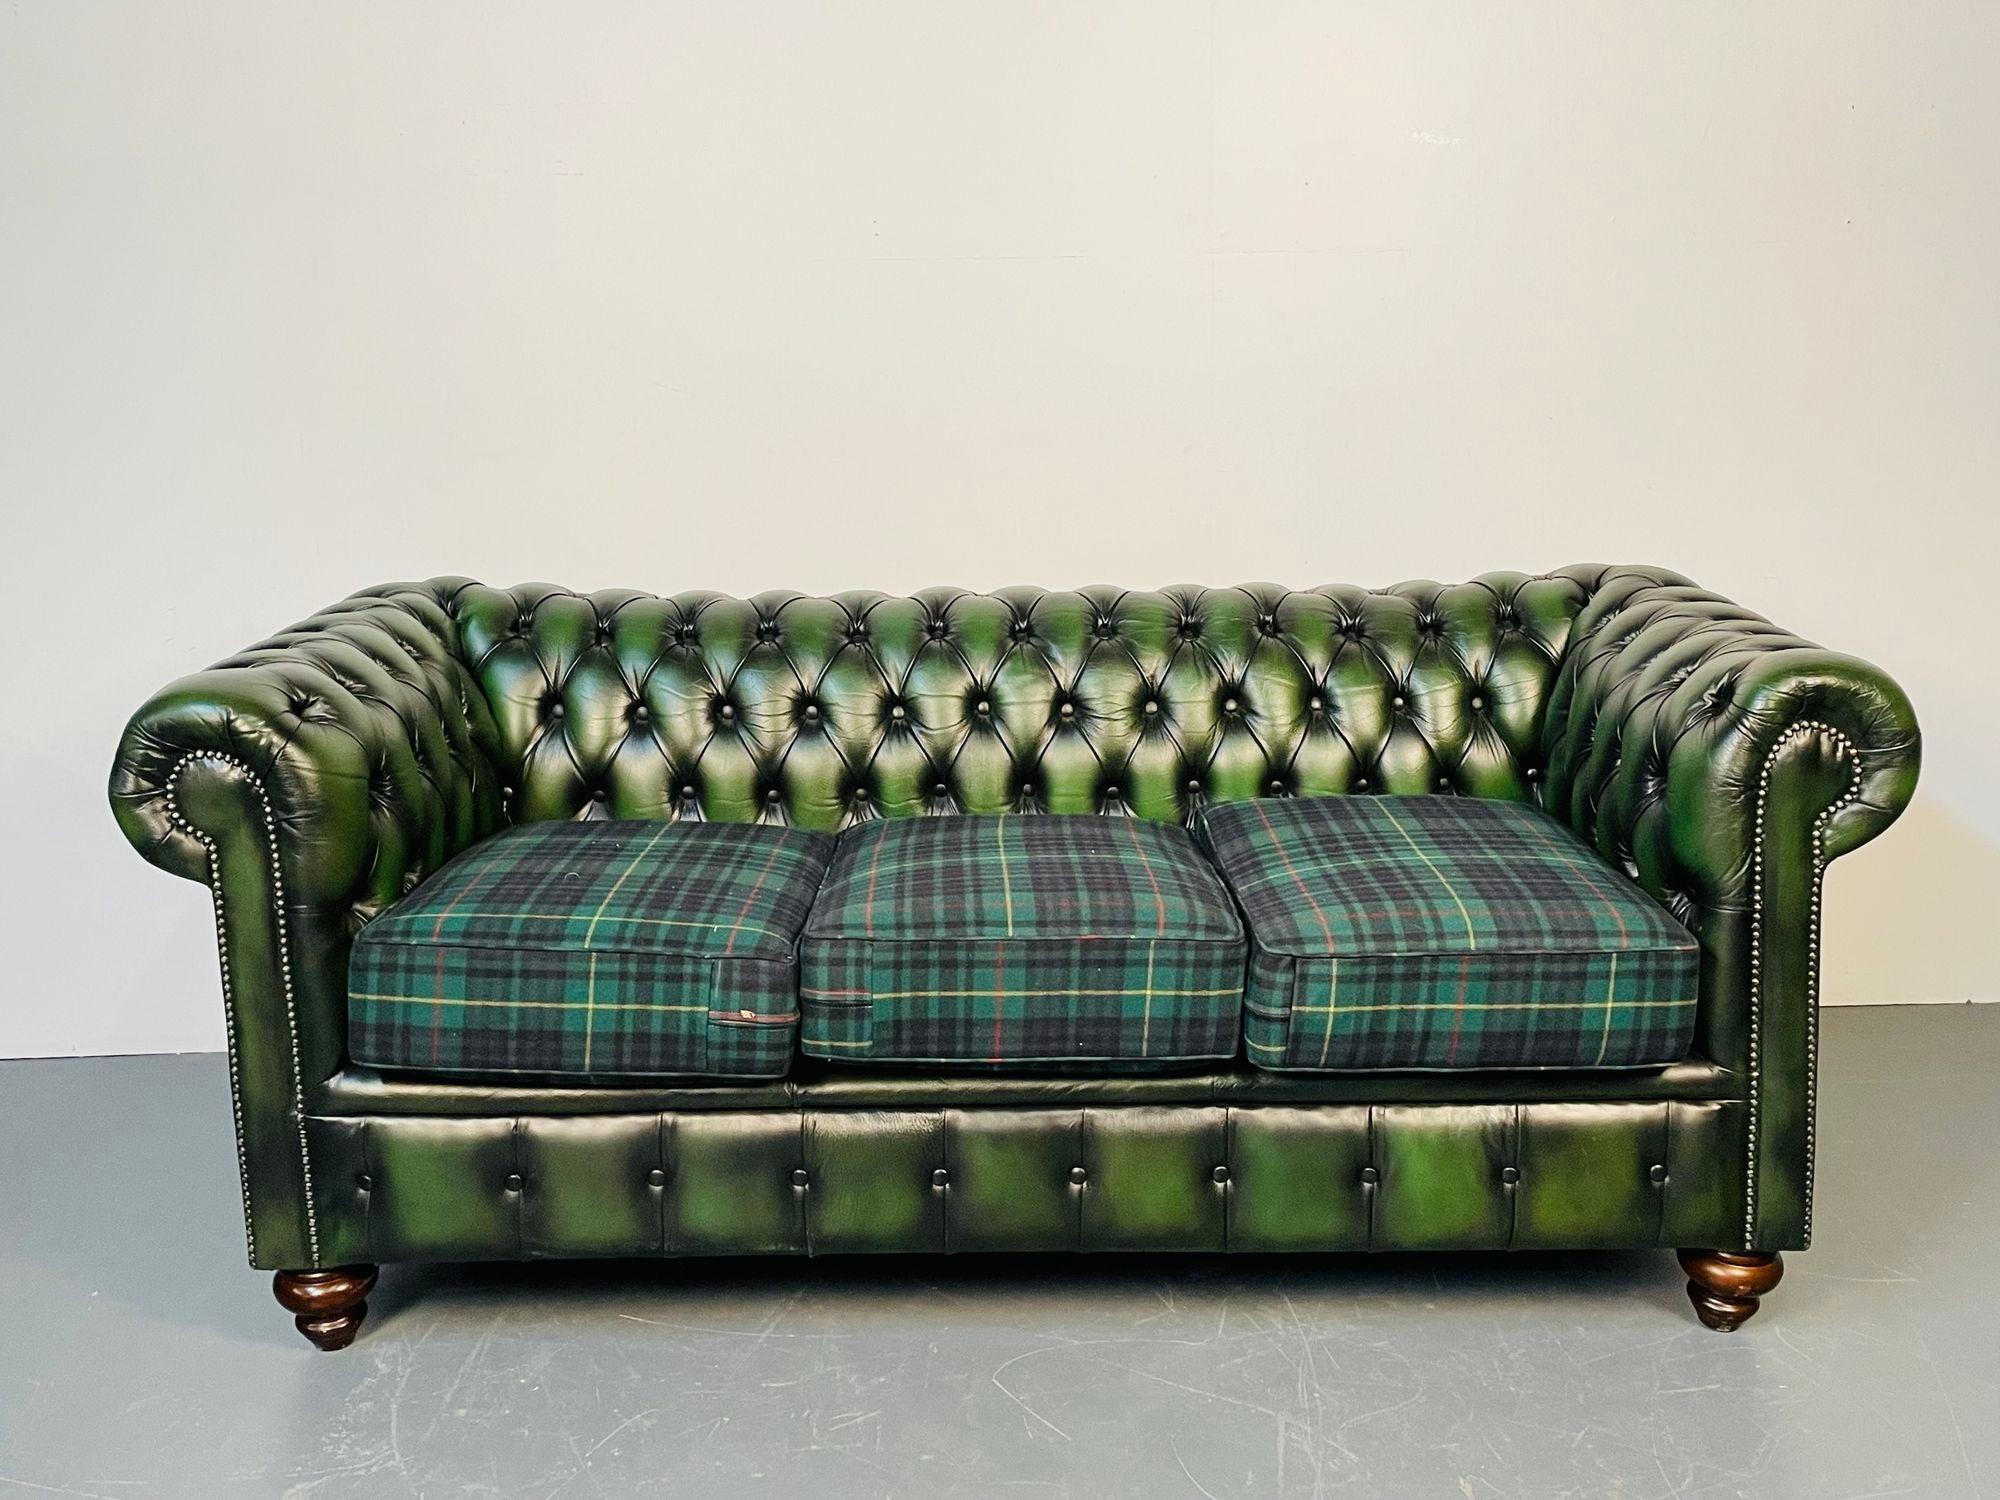 A green leather chesterfield sofa or settee style of Ralph Lauren 
A fine leather fully tufted chesterfield with plaid seat cushions in the Georgian style on mahogany bun feet. In good overall condition. 
Measures: 31H x 76W x 35D / SH 21
lXX